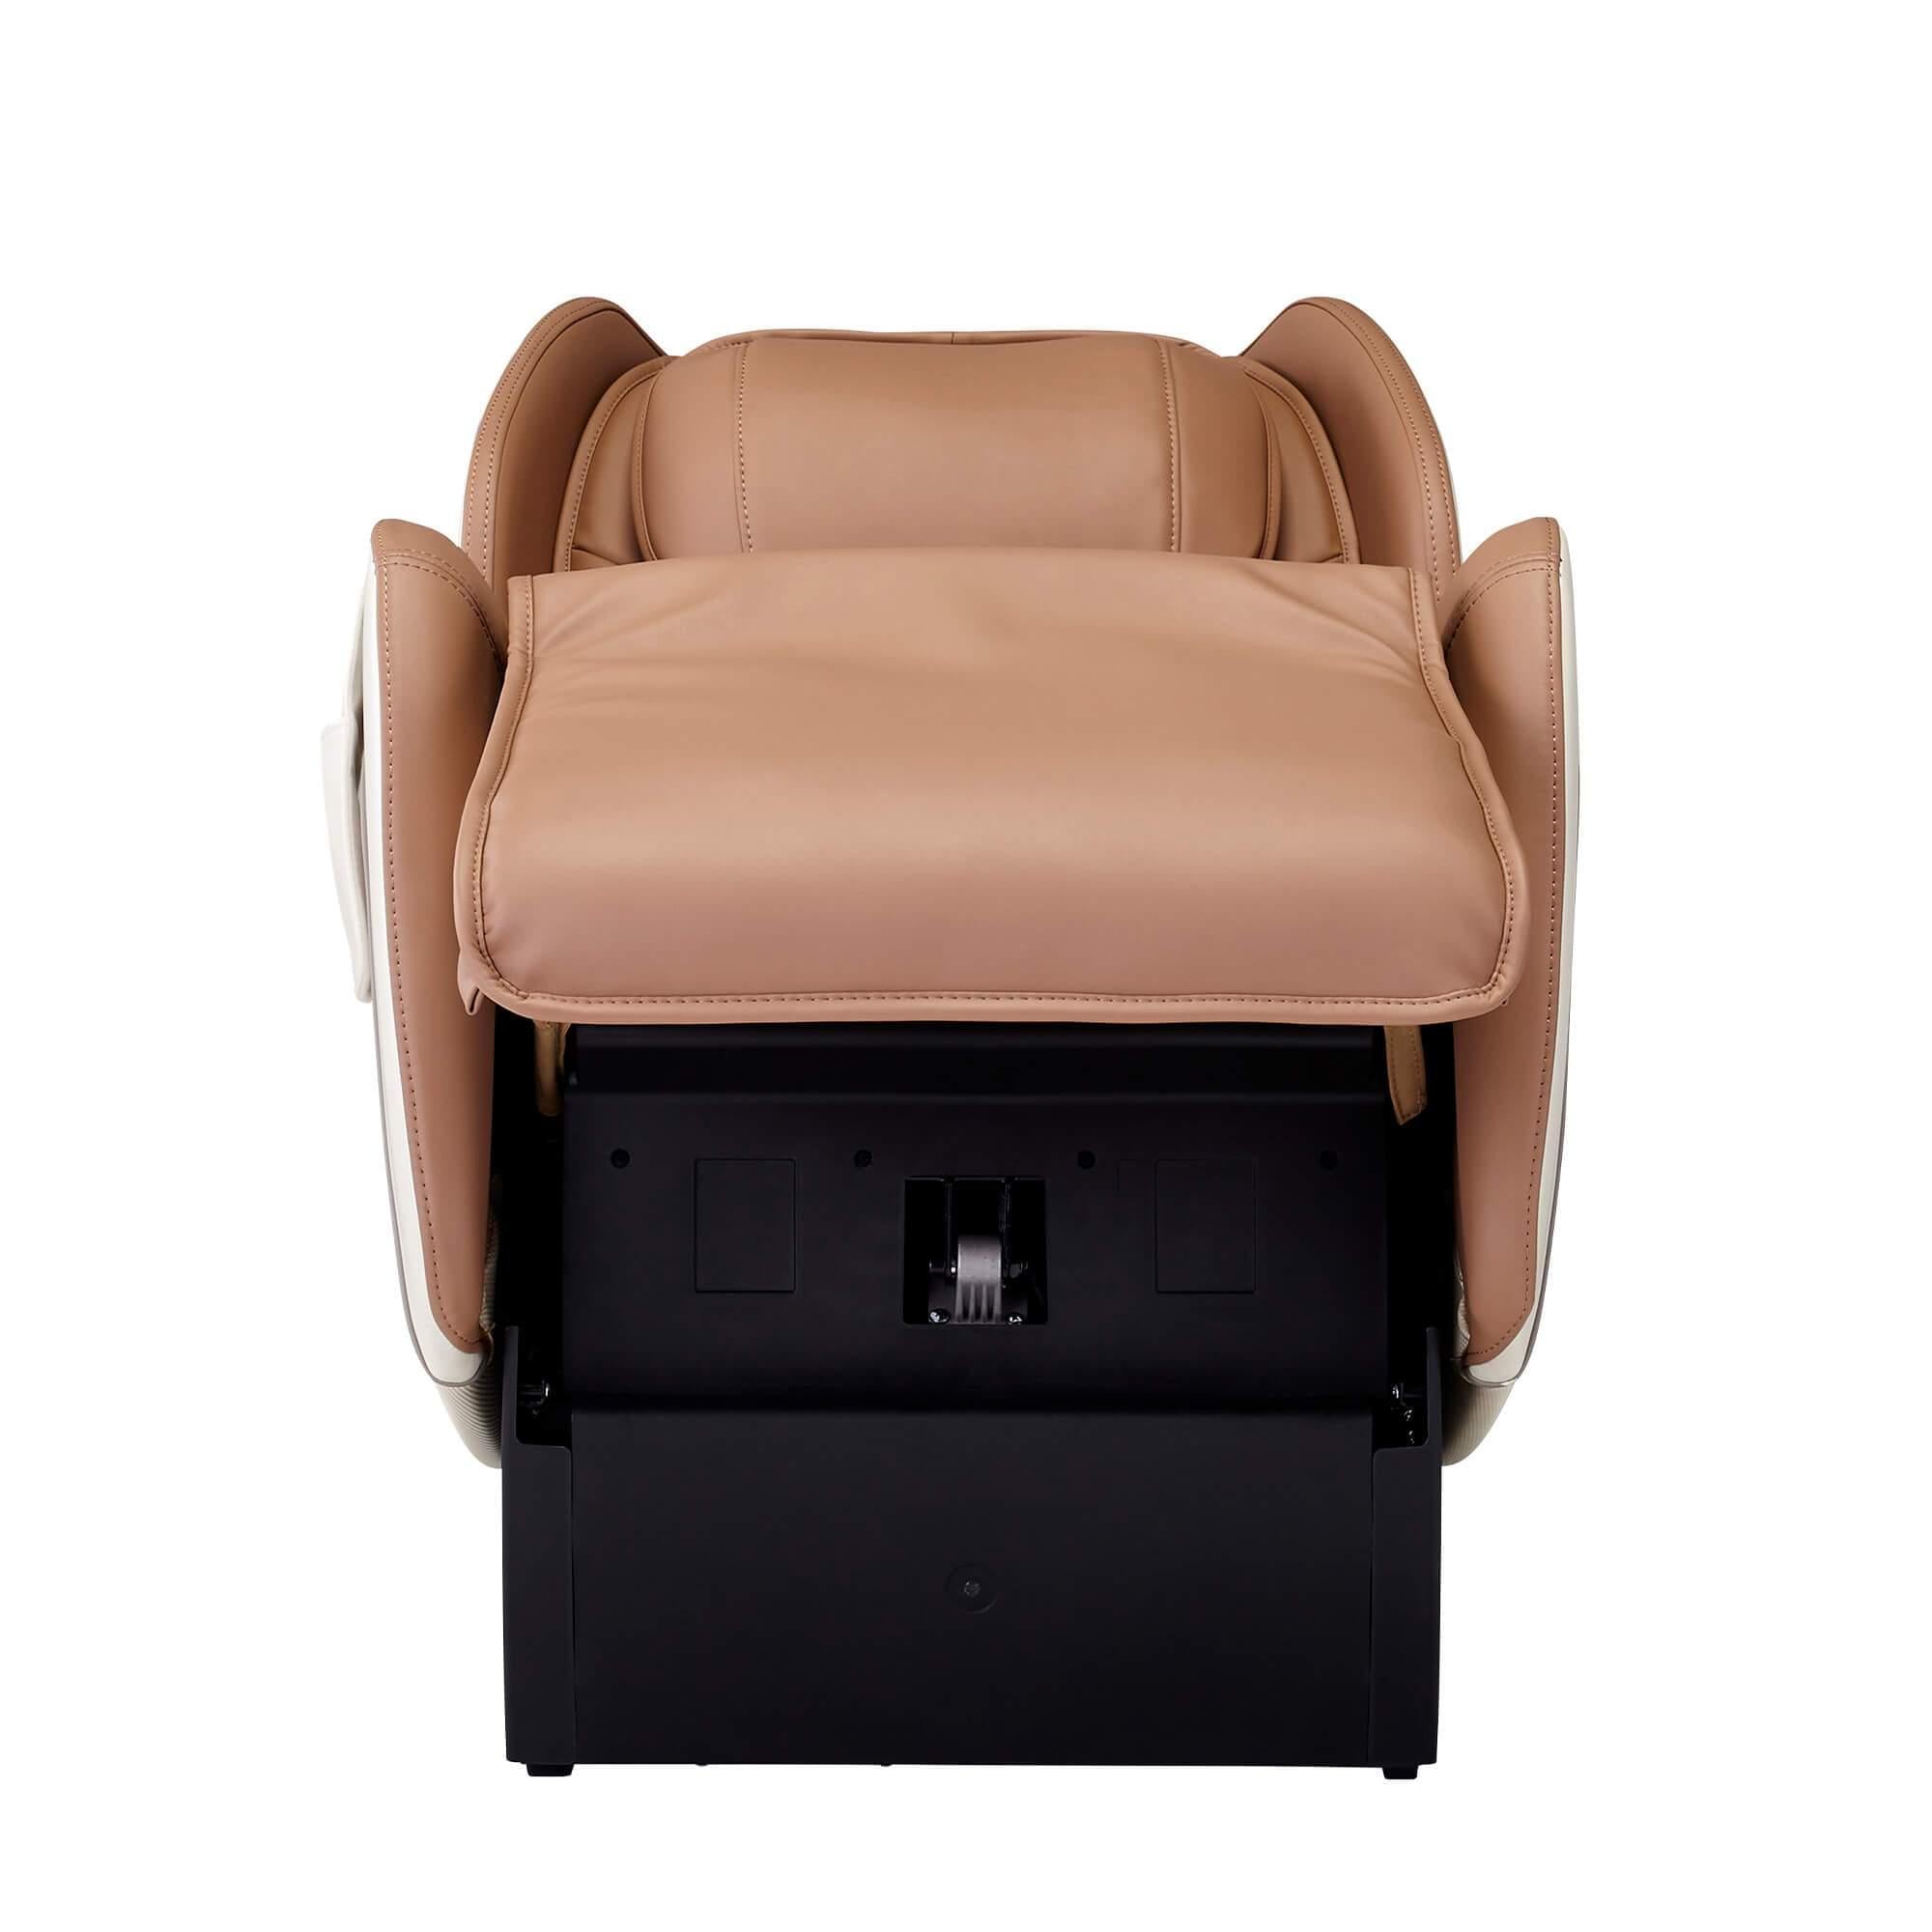 Chair Synca Unmatched Massage ZEBRA and – Plus CirC Comfort Style CHAIRS MASSAGE -